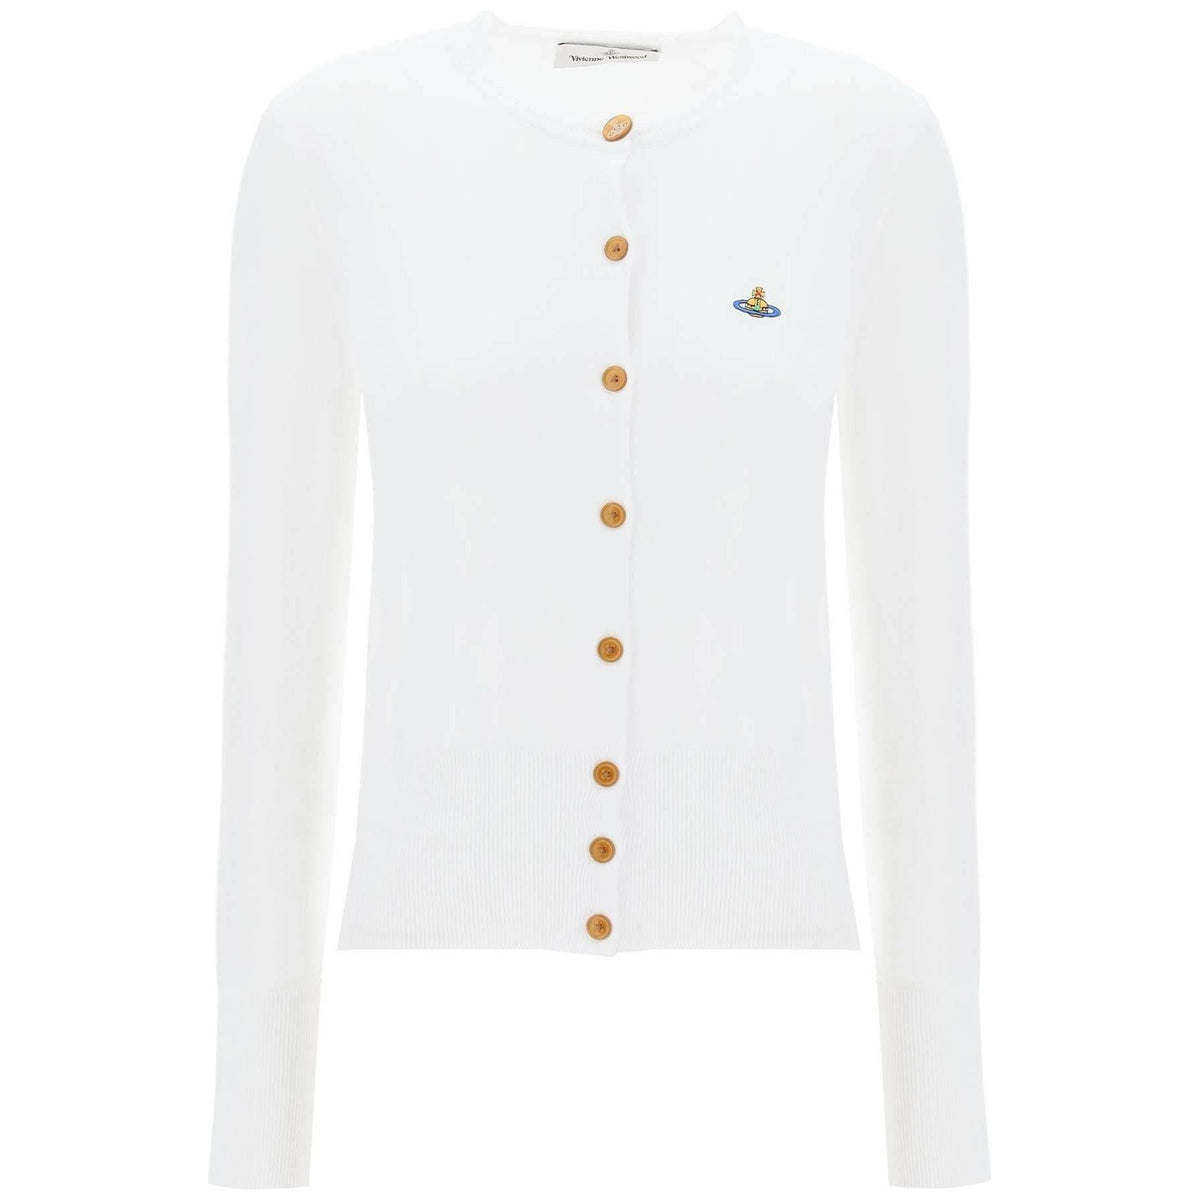 VIVIENNE WESTWOOD - White Cotton Knit Bea Cardigan With Orb Logo Embroidery - JOHN JULIA